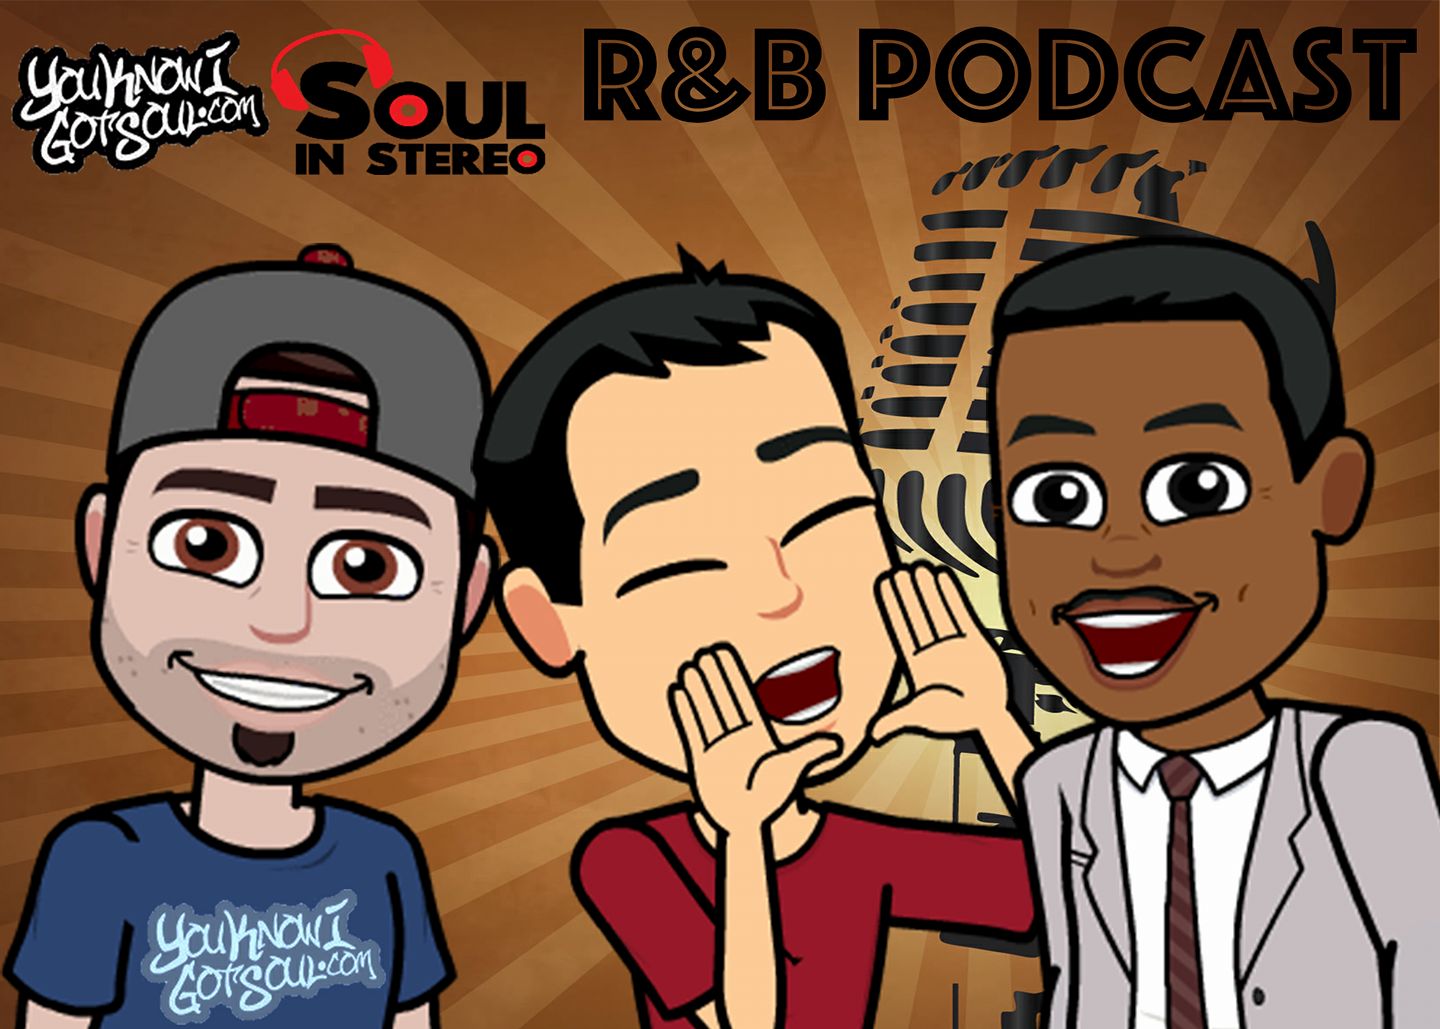 Michael Jackson Is Still Outselling R&B Artists In 2017??? – YouKnowIGotSoul R&B Podcast Episode #65